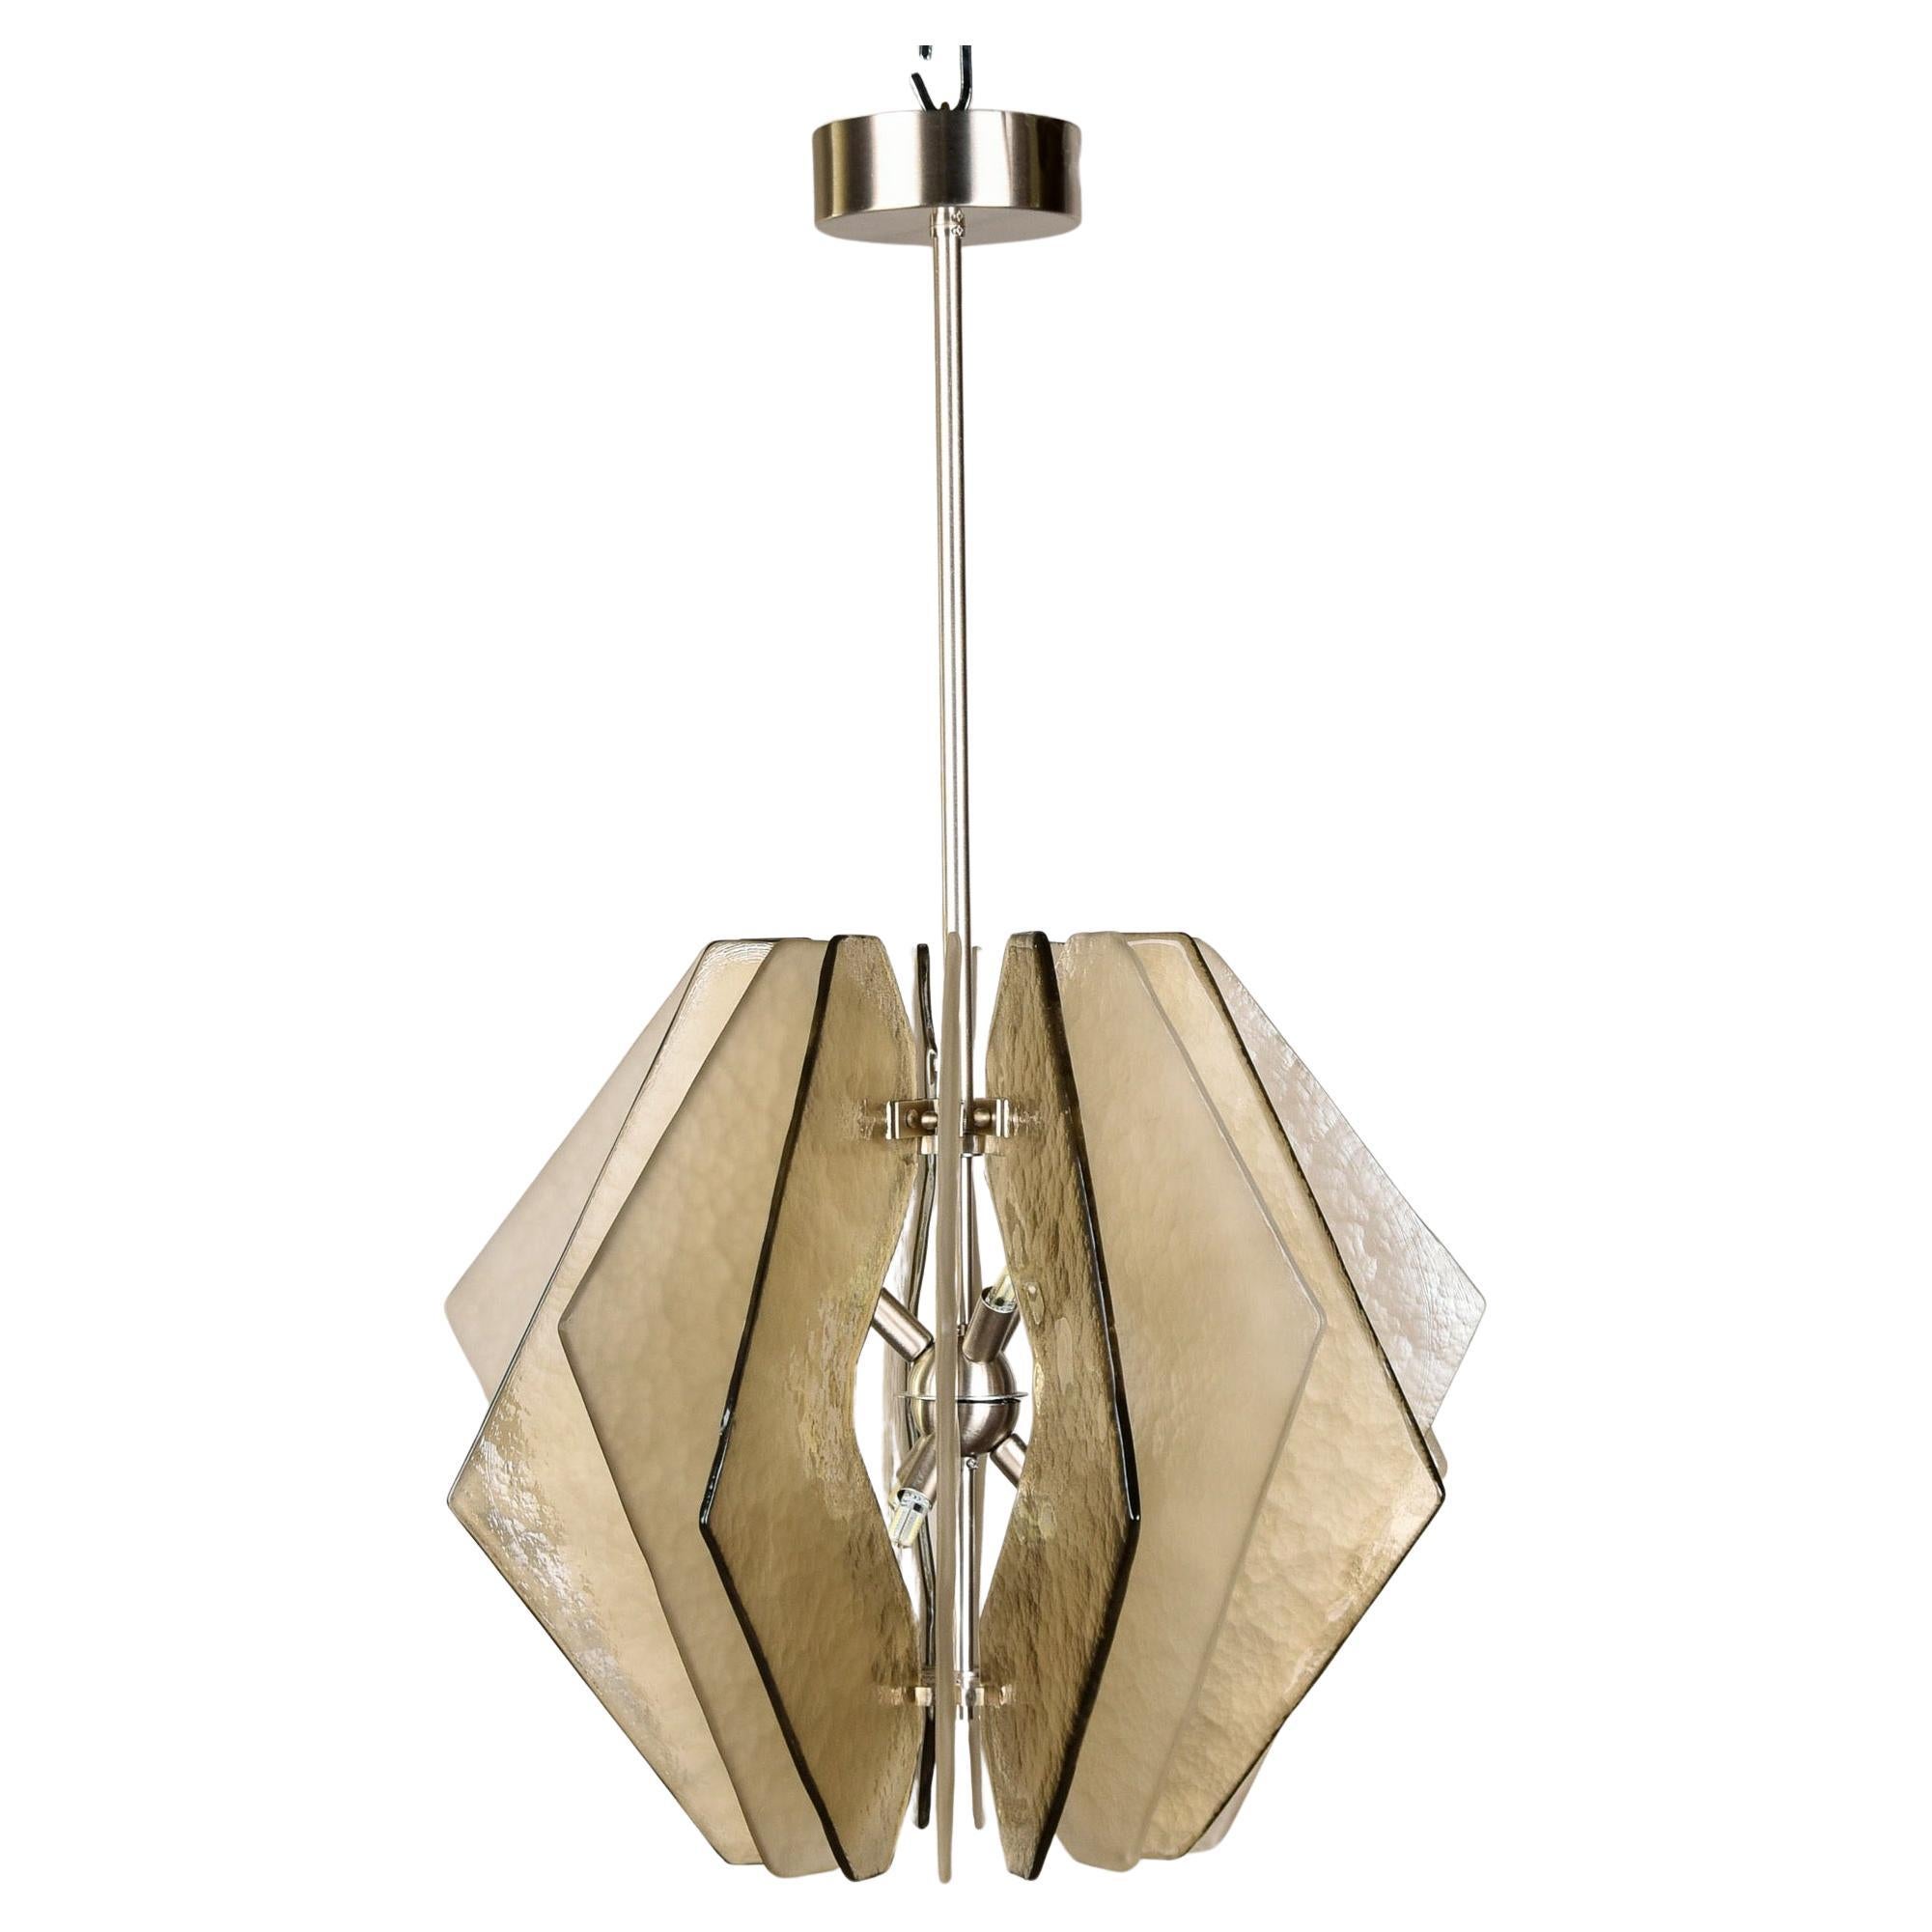 New Italian Chandelier with Taupe Murano Glass Panels